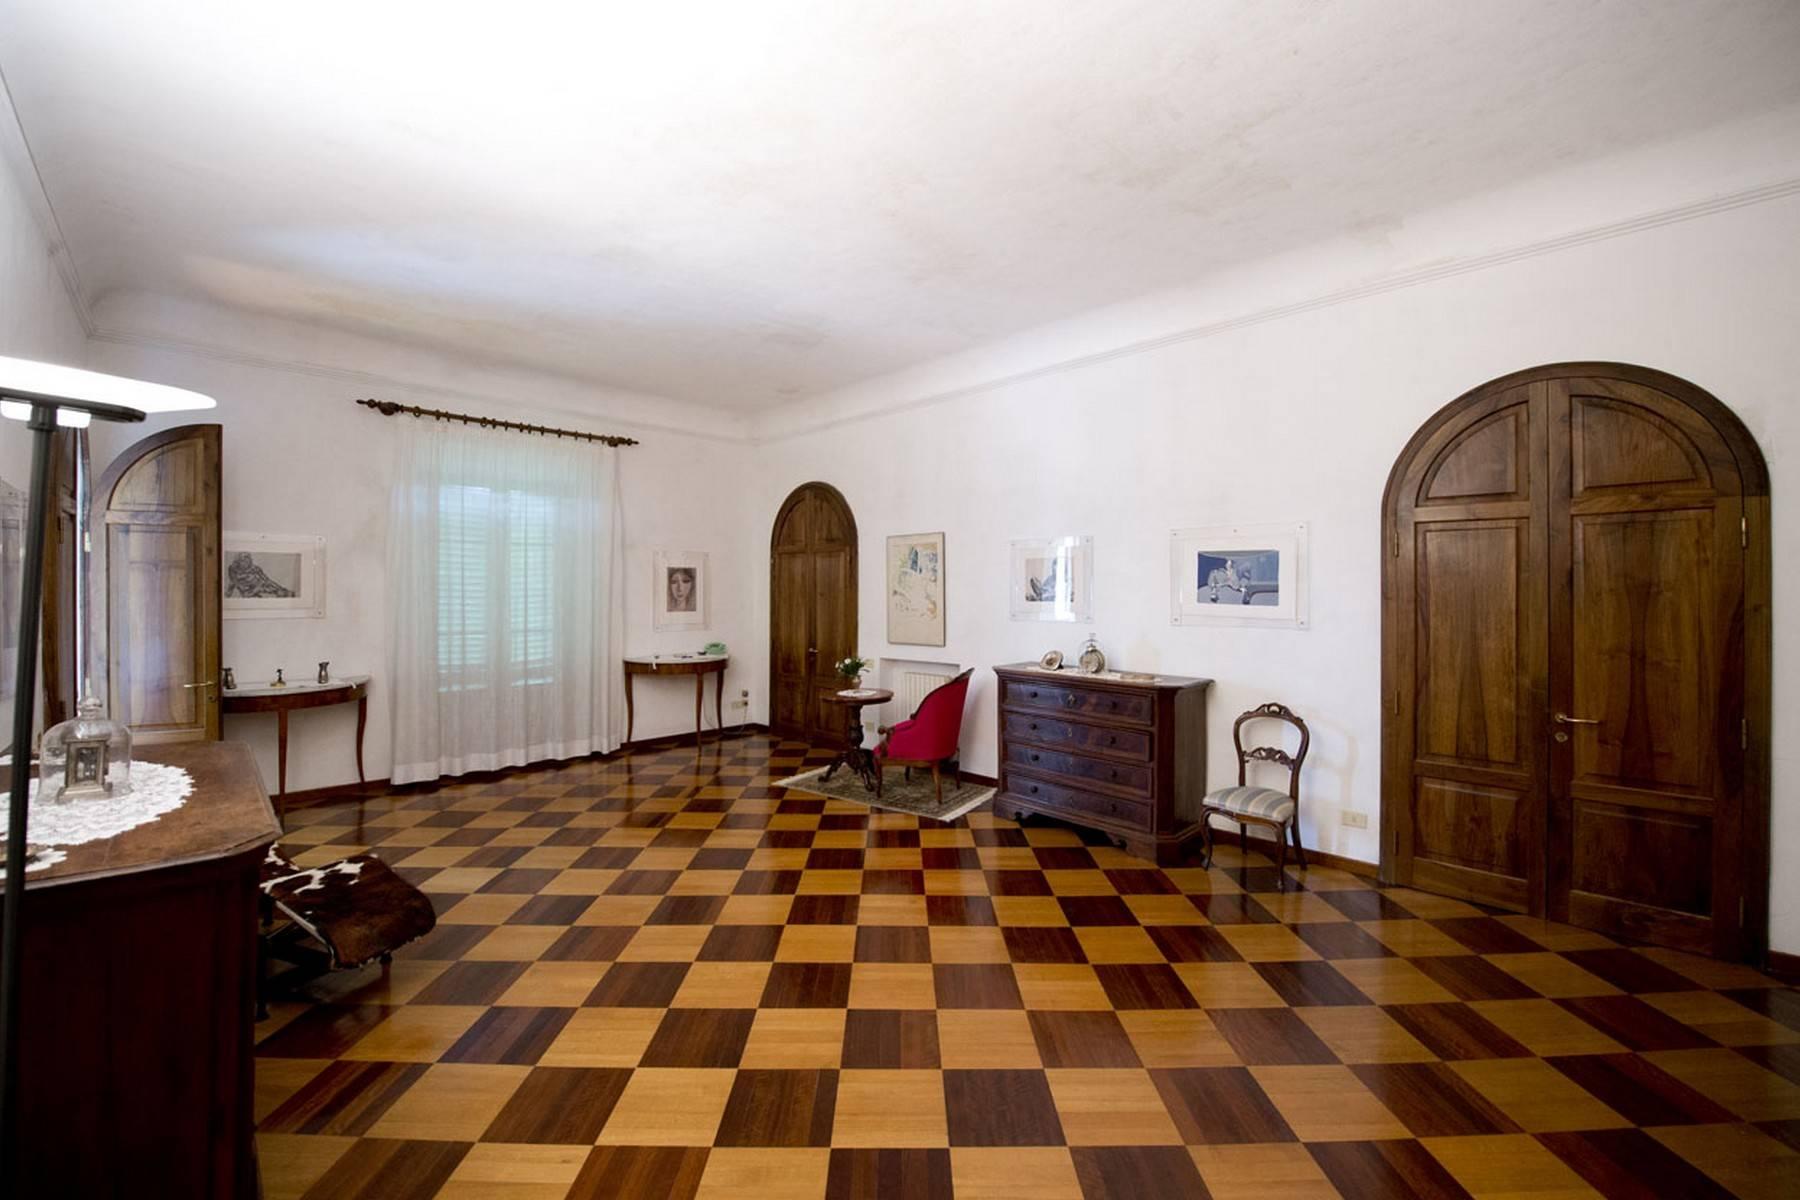 Aristocratic Villa for Sale on the Hills of Siena - 10